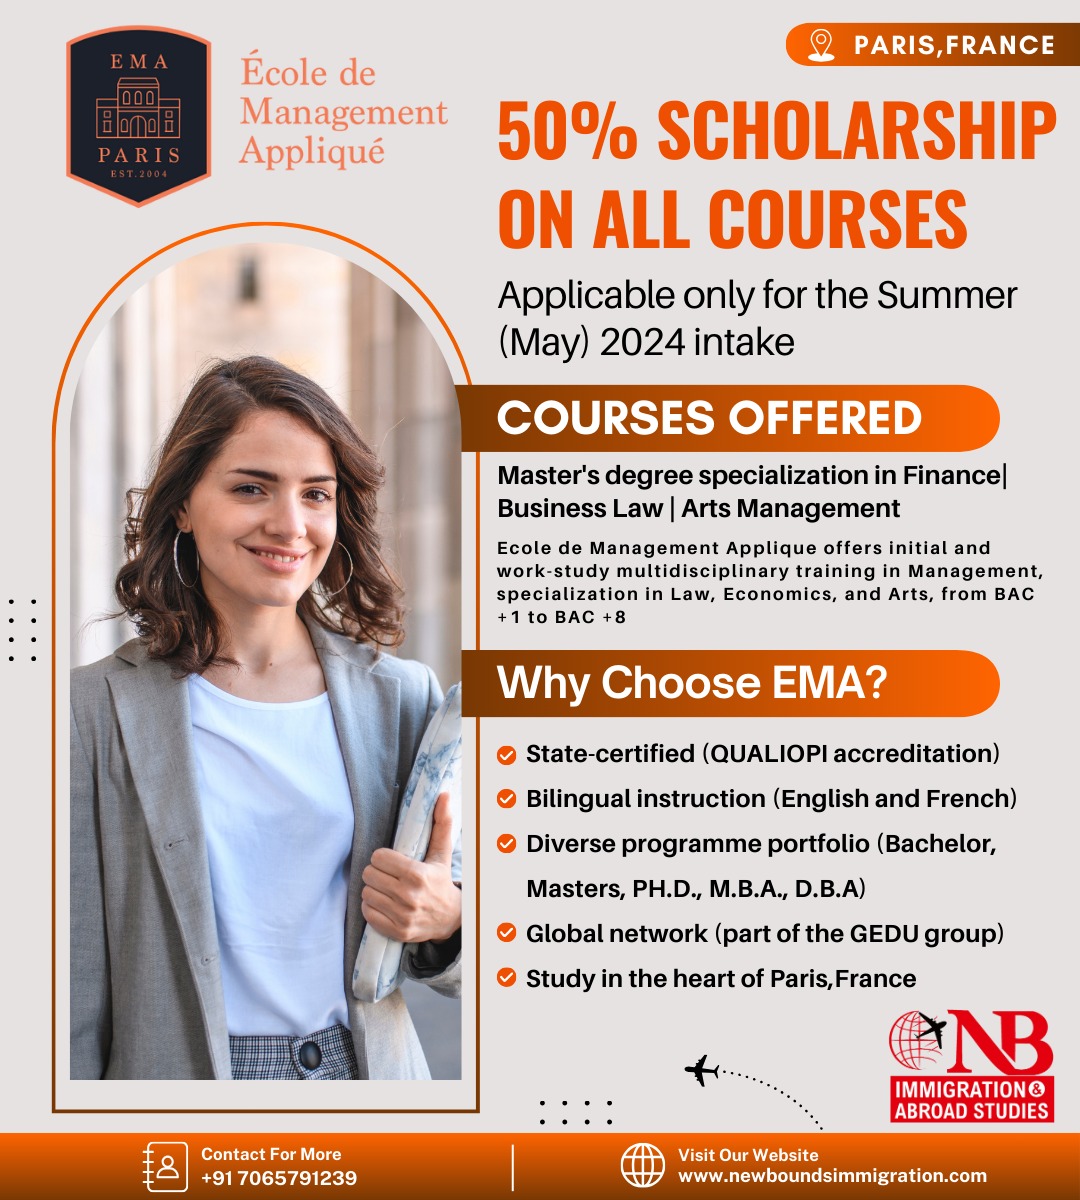 Unlock your academic potential with a 50% scholarship on all courses at Ecol de Management Applique, Canada! 🌟 DM us to learn more!

#newboundsimmigration #movetocanada #StudyAbroad #scholarships #ScholarshipChallenge #ScholarshipOpportunity #studyabroadlife #studyabroadjourney